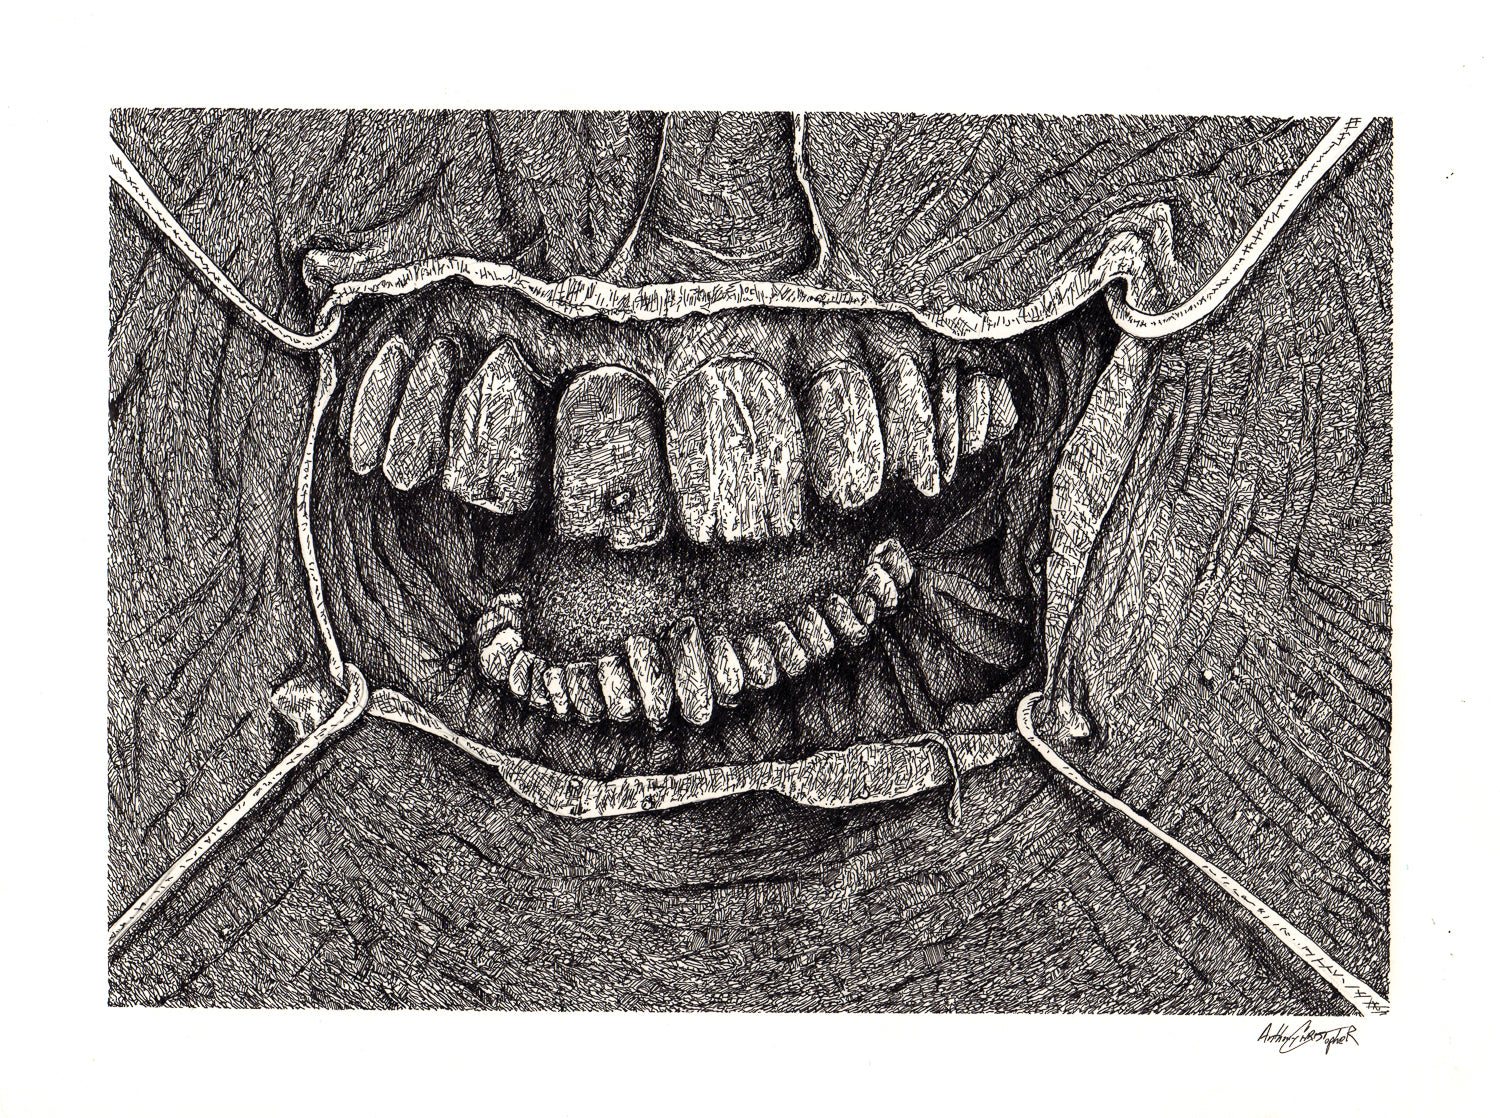 "Teeth" by Anthony Christopher